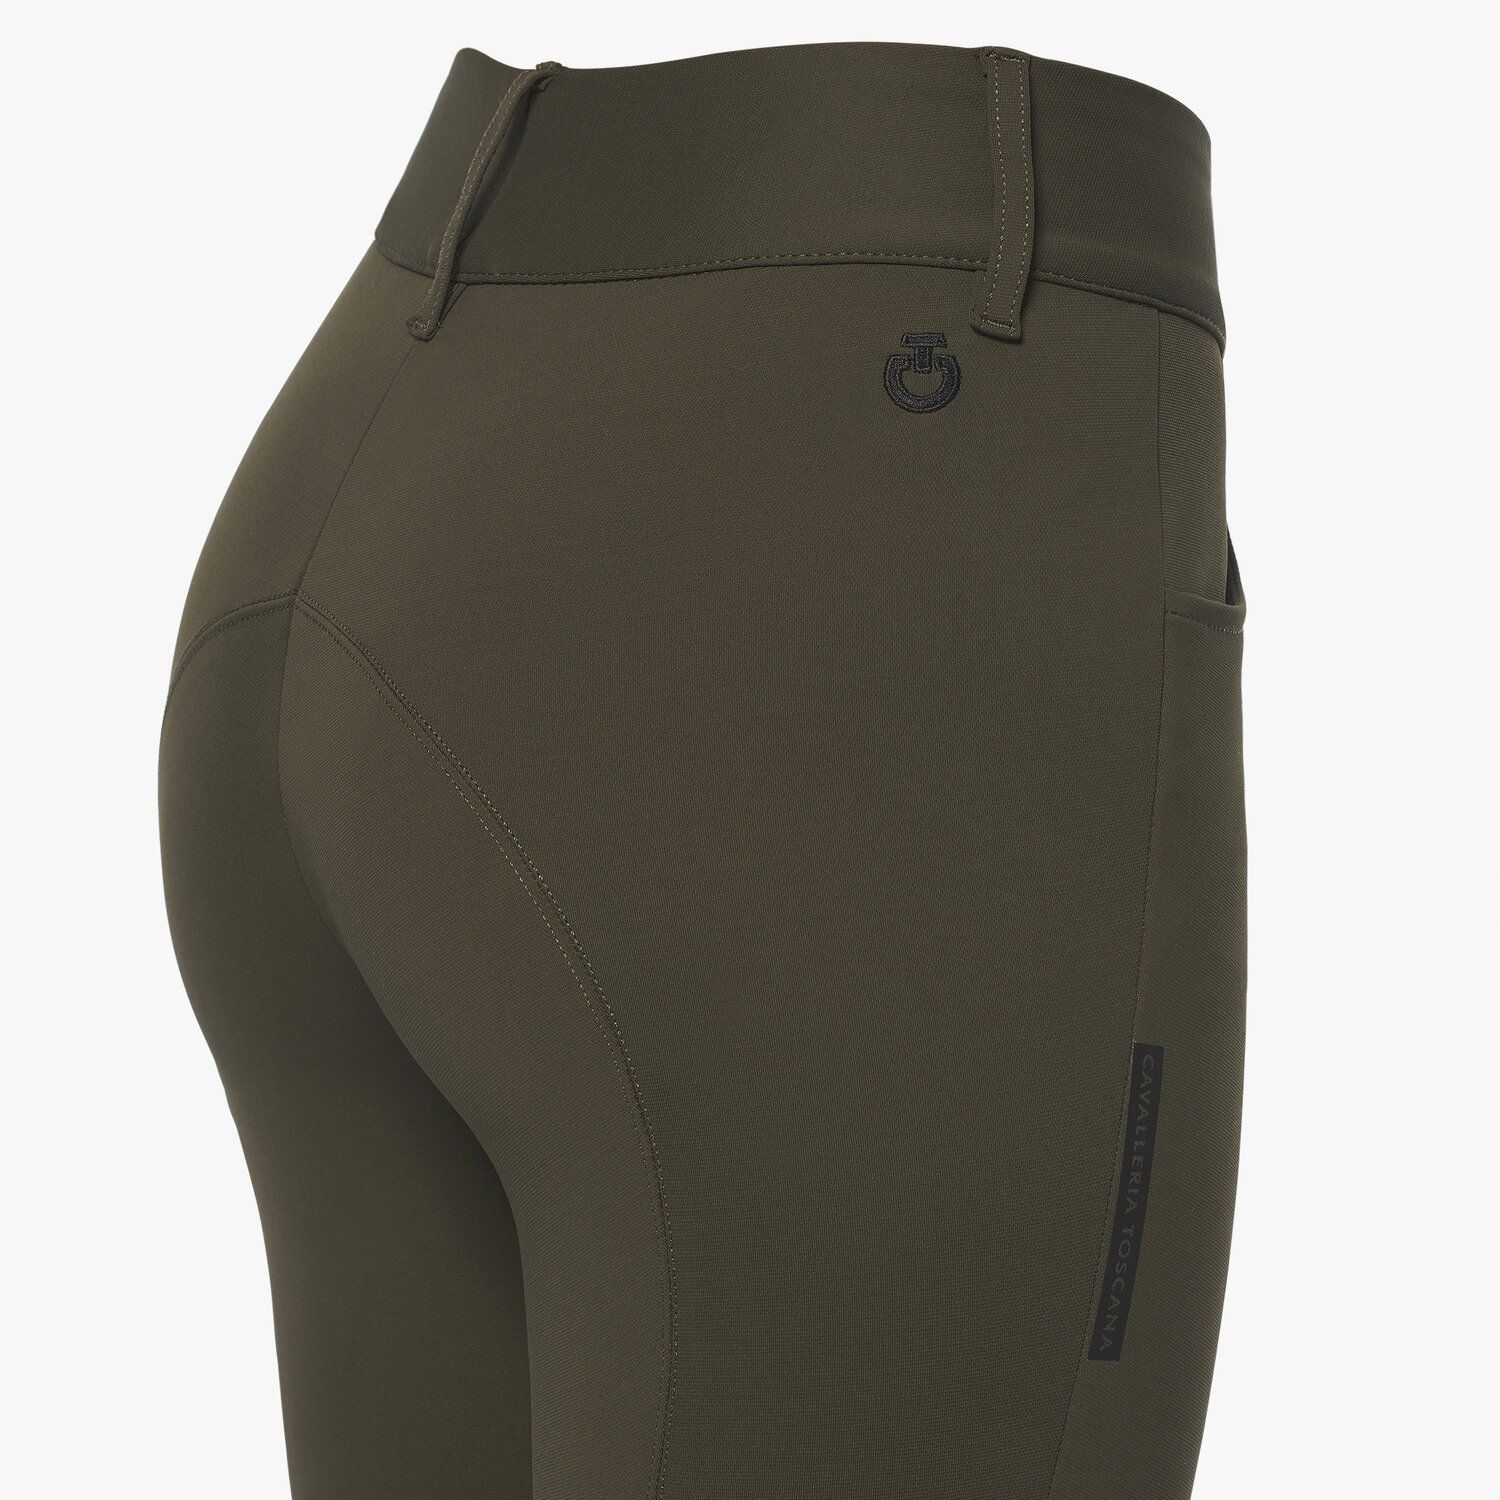 Cavalleria Toscana Women's dressage breeches with perforated logo tape MILITARY GREEN-4